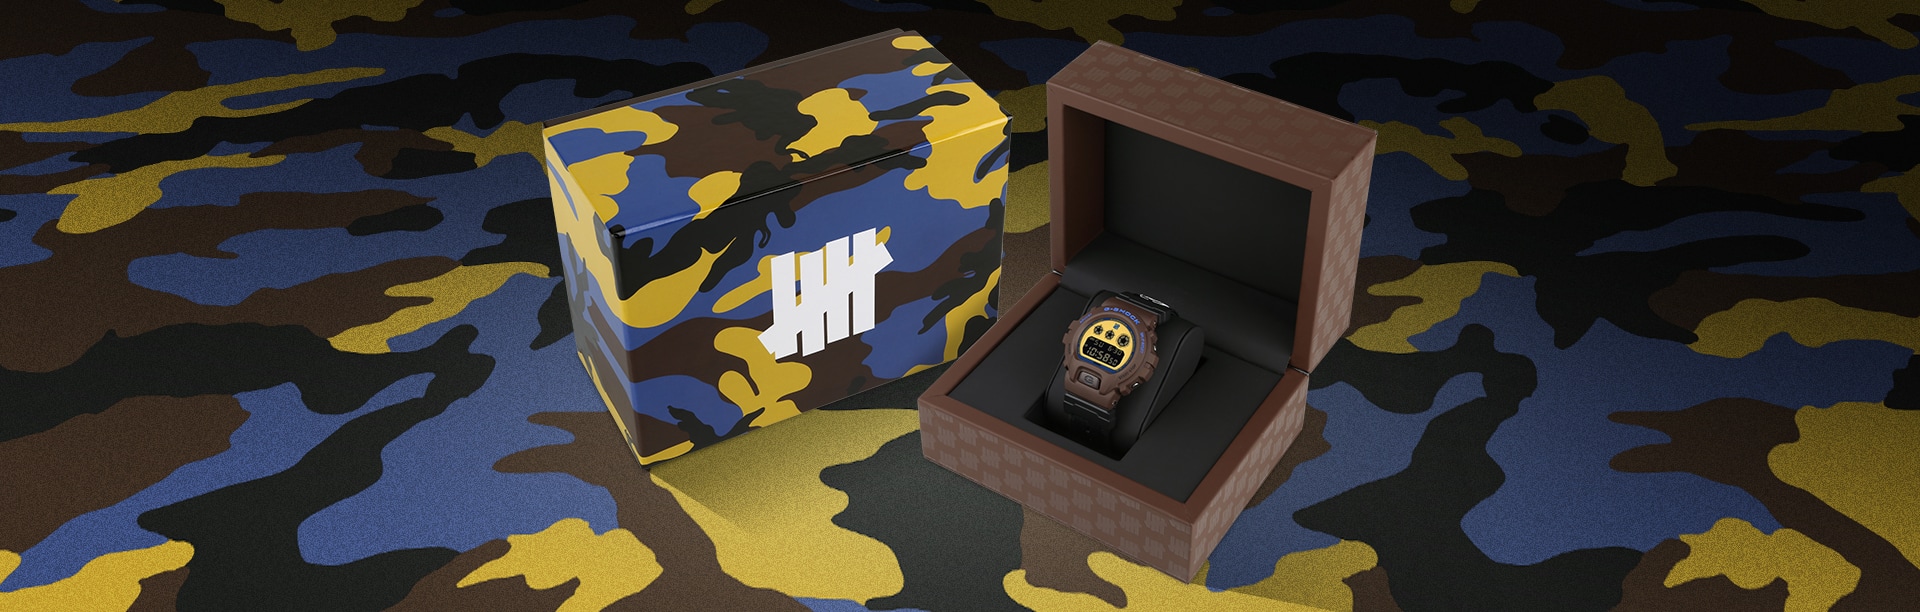 G-SHOCK x UNDEFEATED DW6900UDCR235 40th anniversary watch in its special packaging with a brown, yellow and blue camoflauge that matches the outer box design